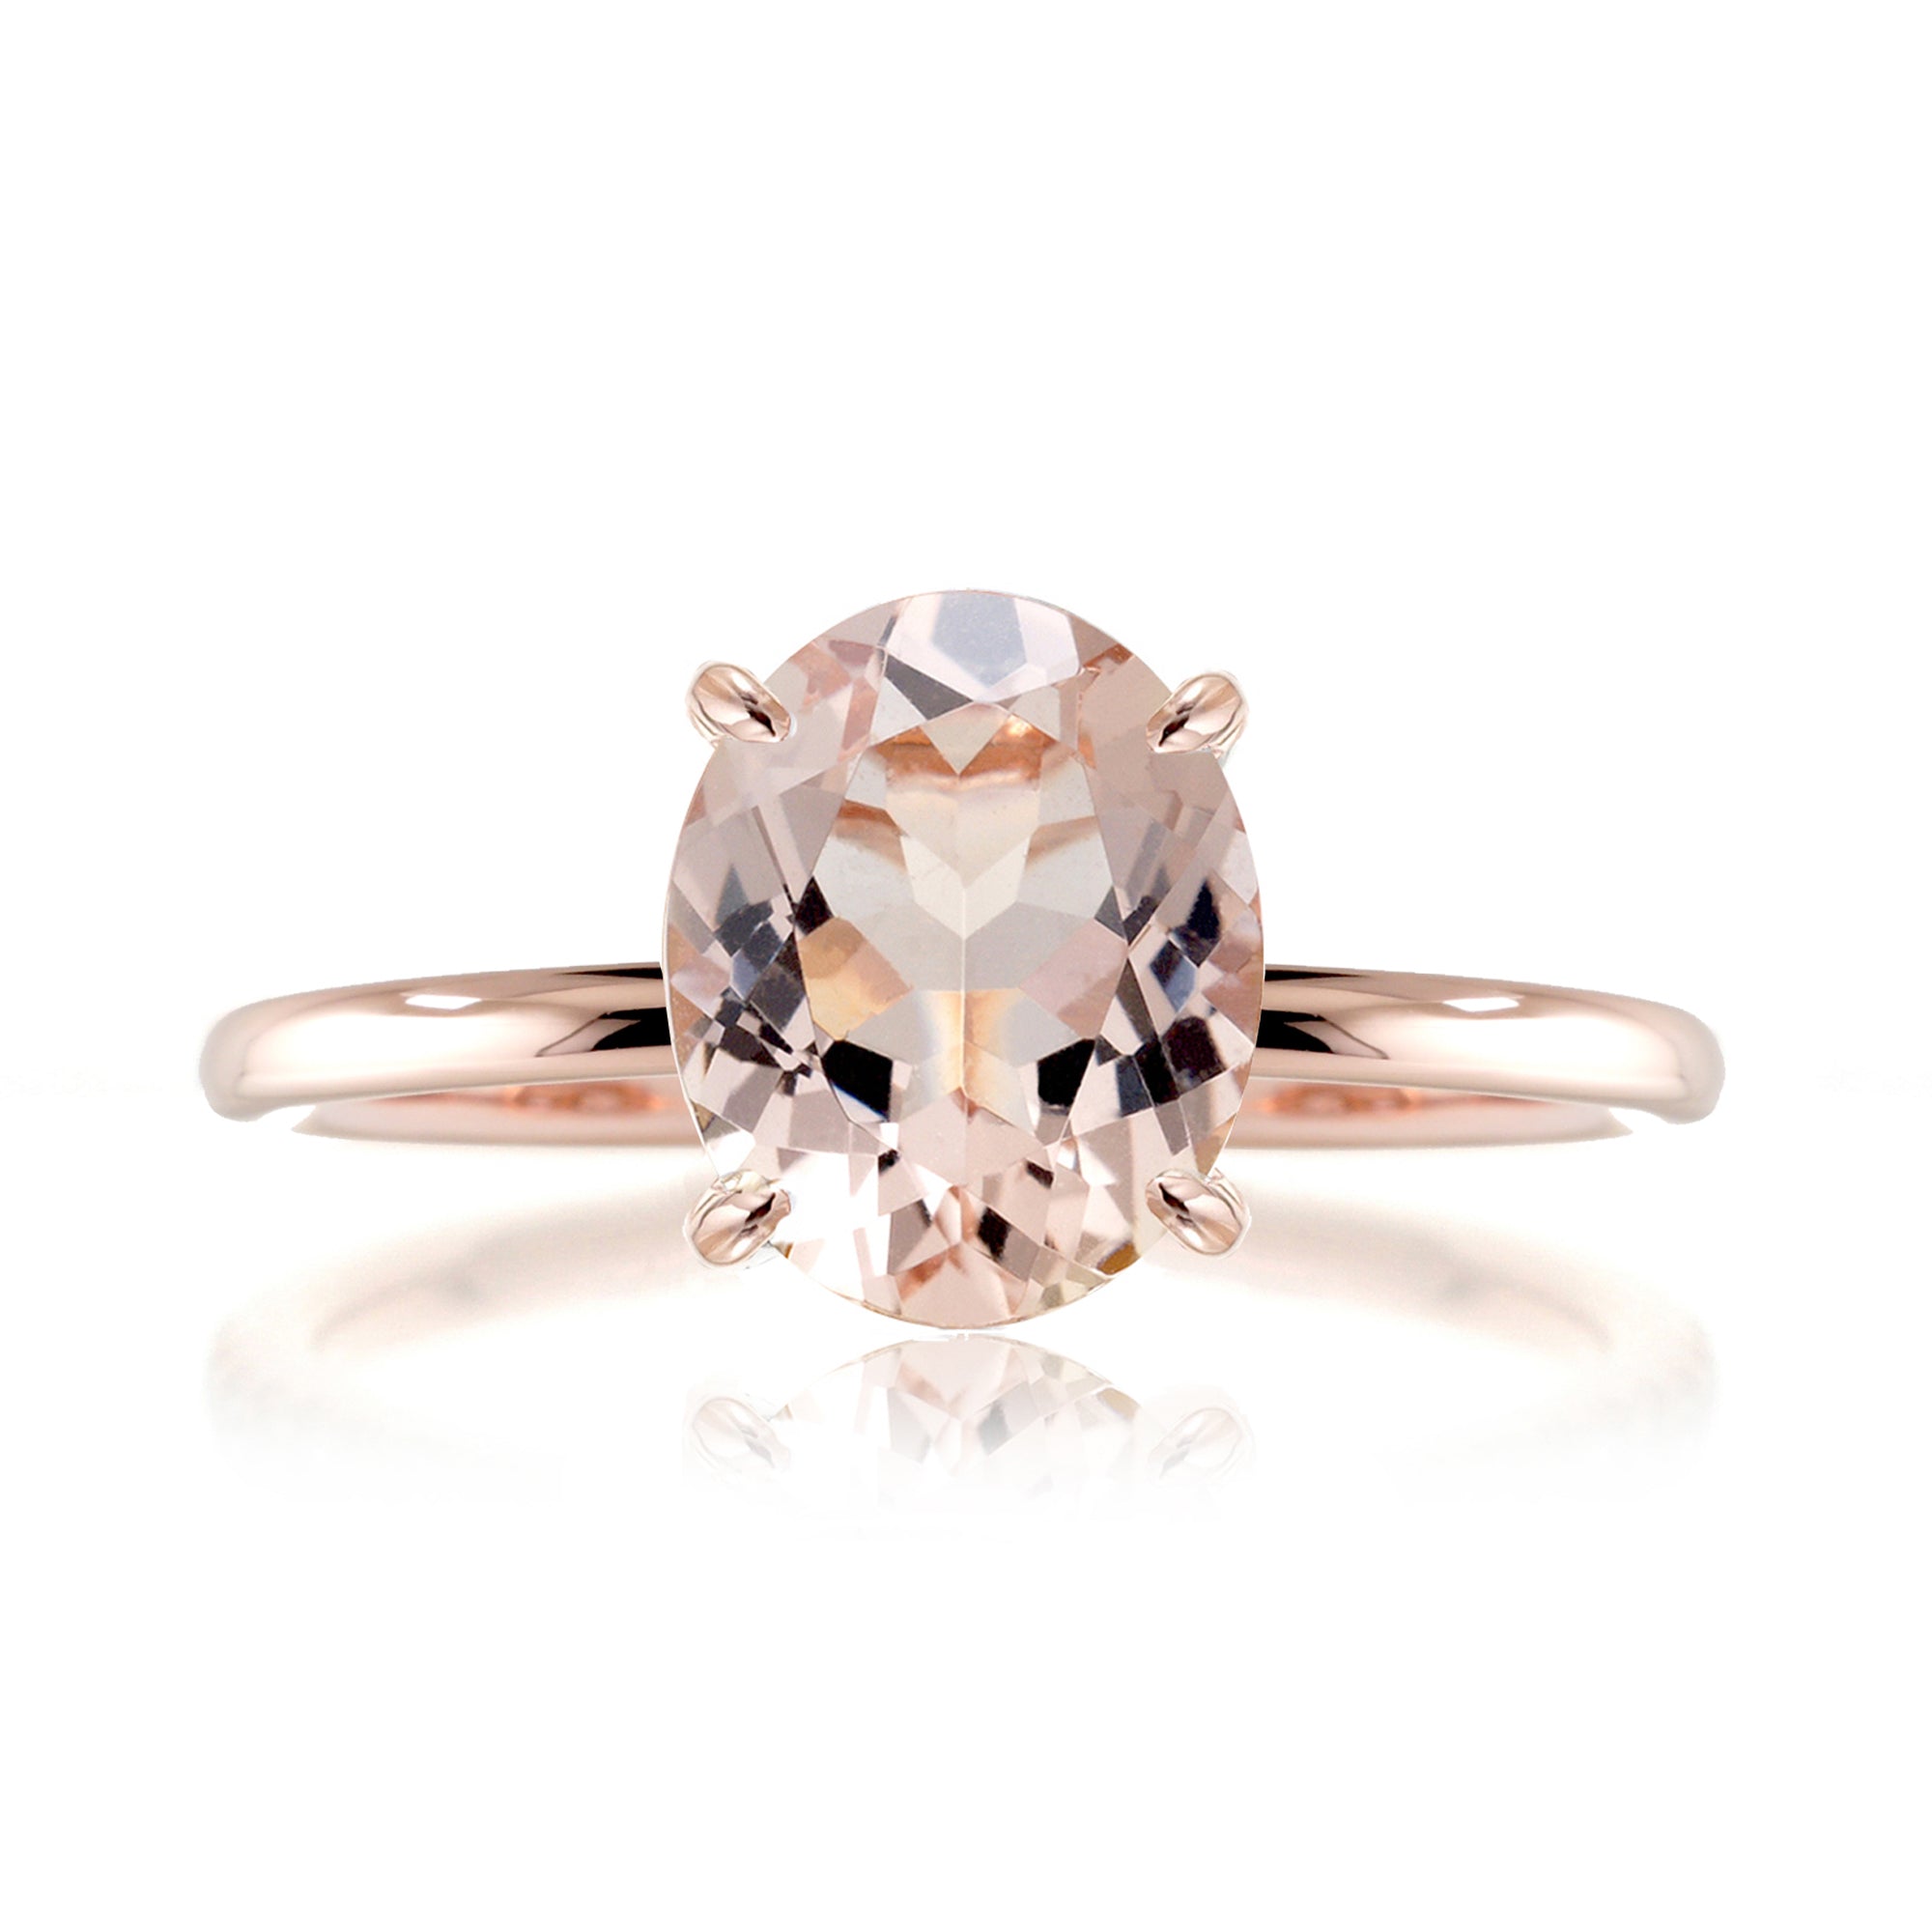 Oval morganite solid band engagement ring rose gold - The Ava